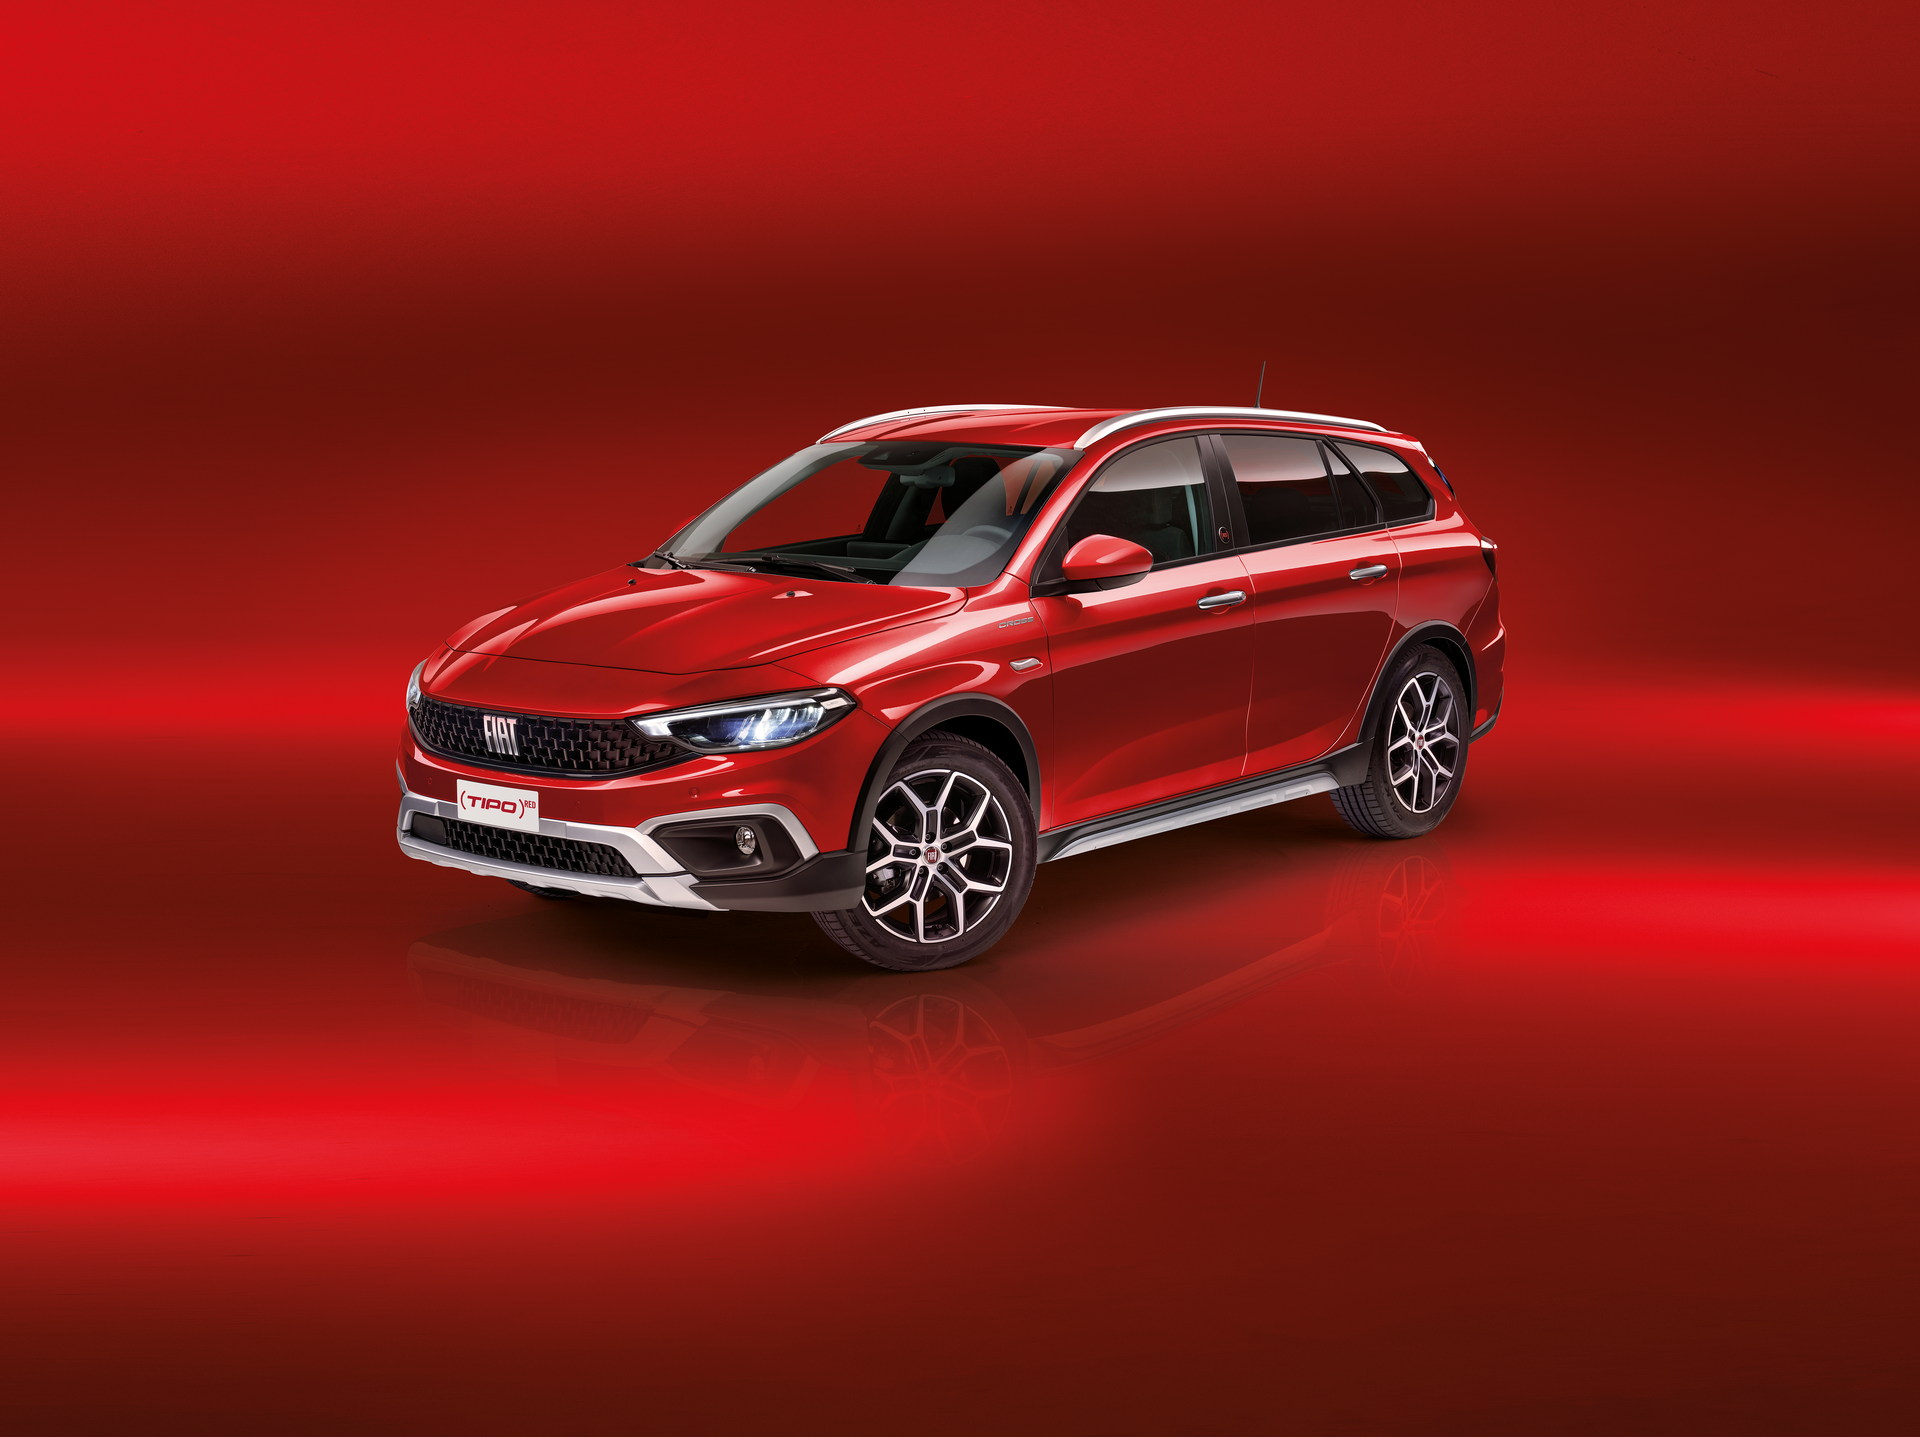 Fiat Tipo Driving, Engines & Performance